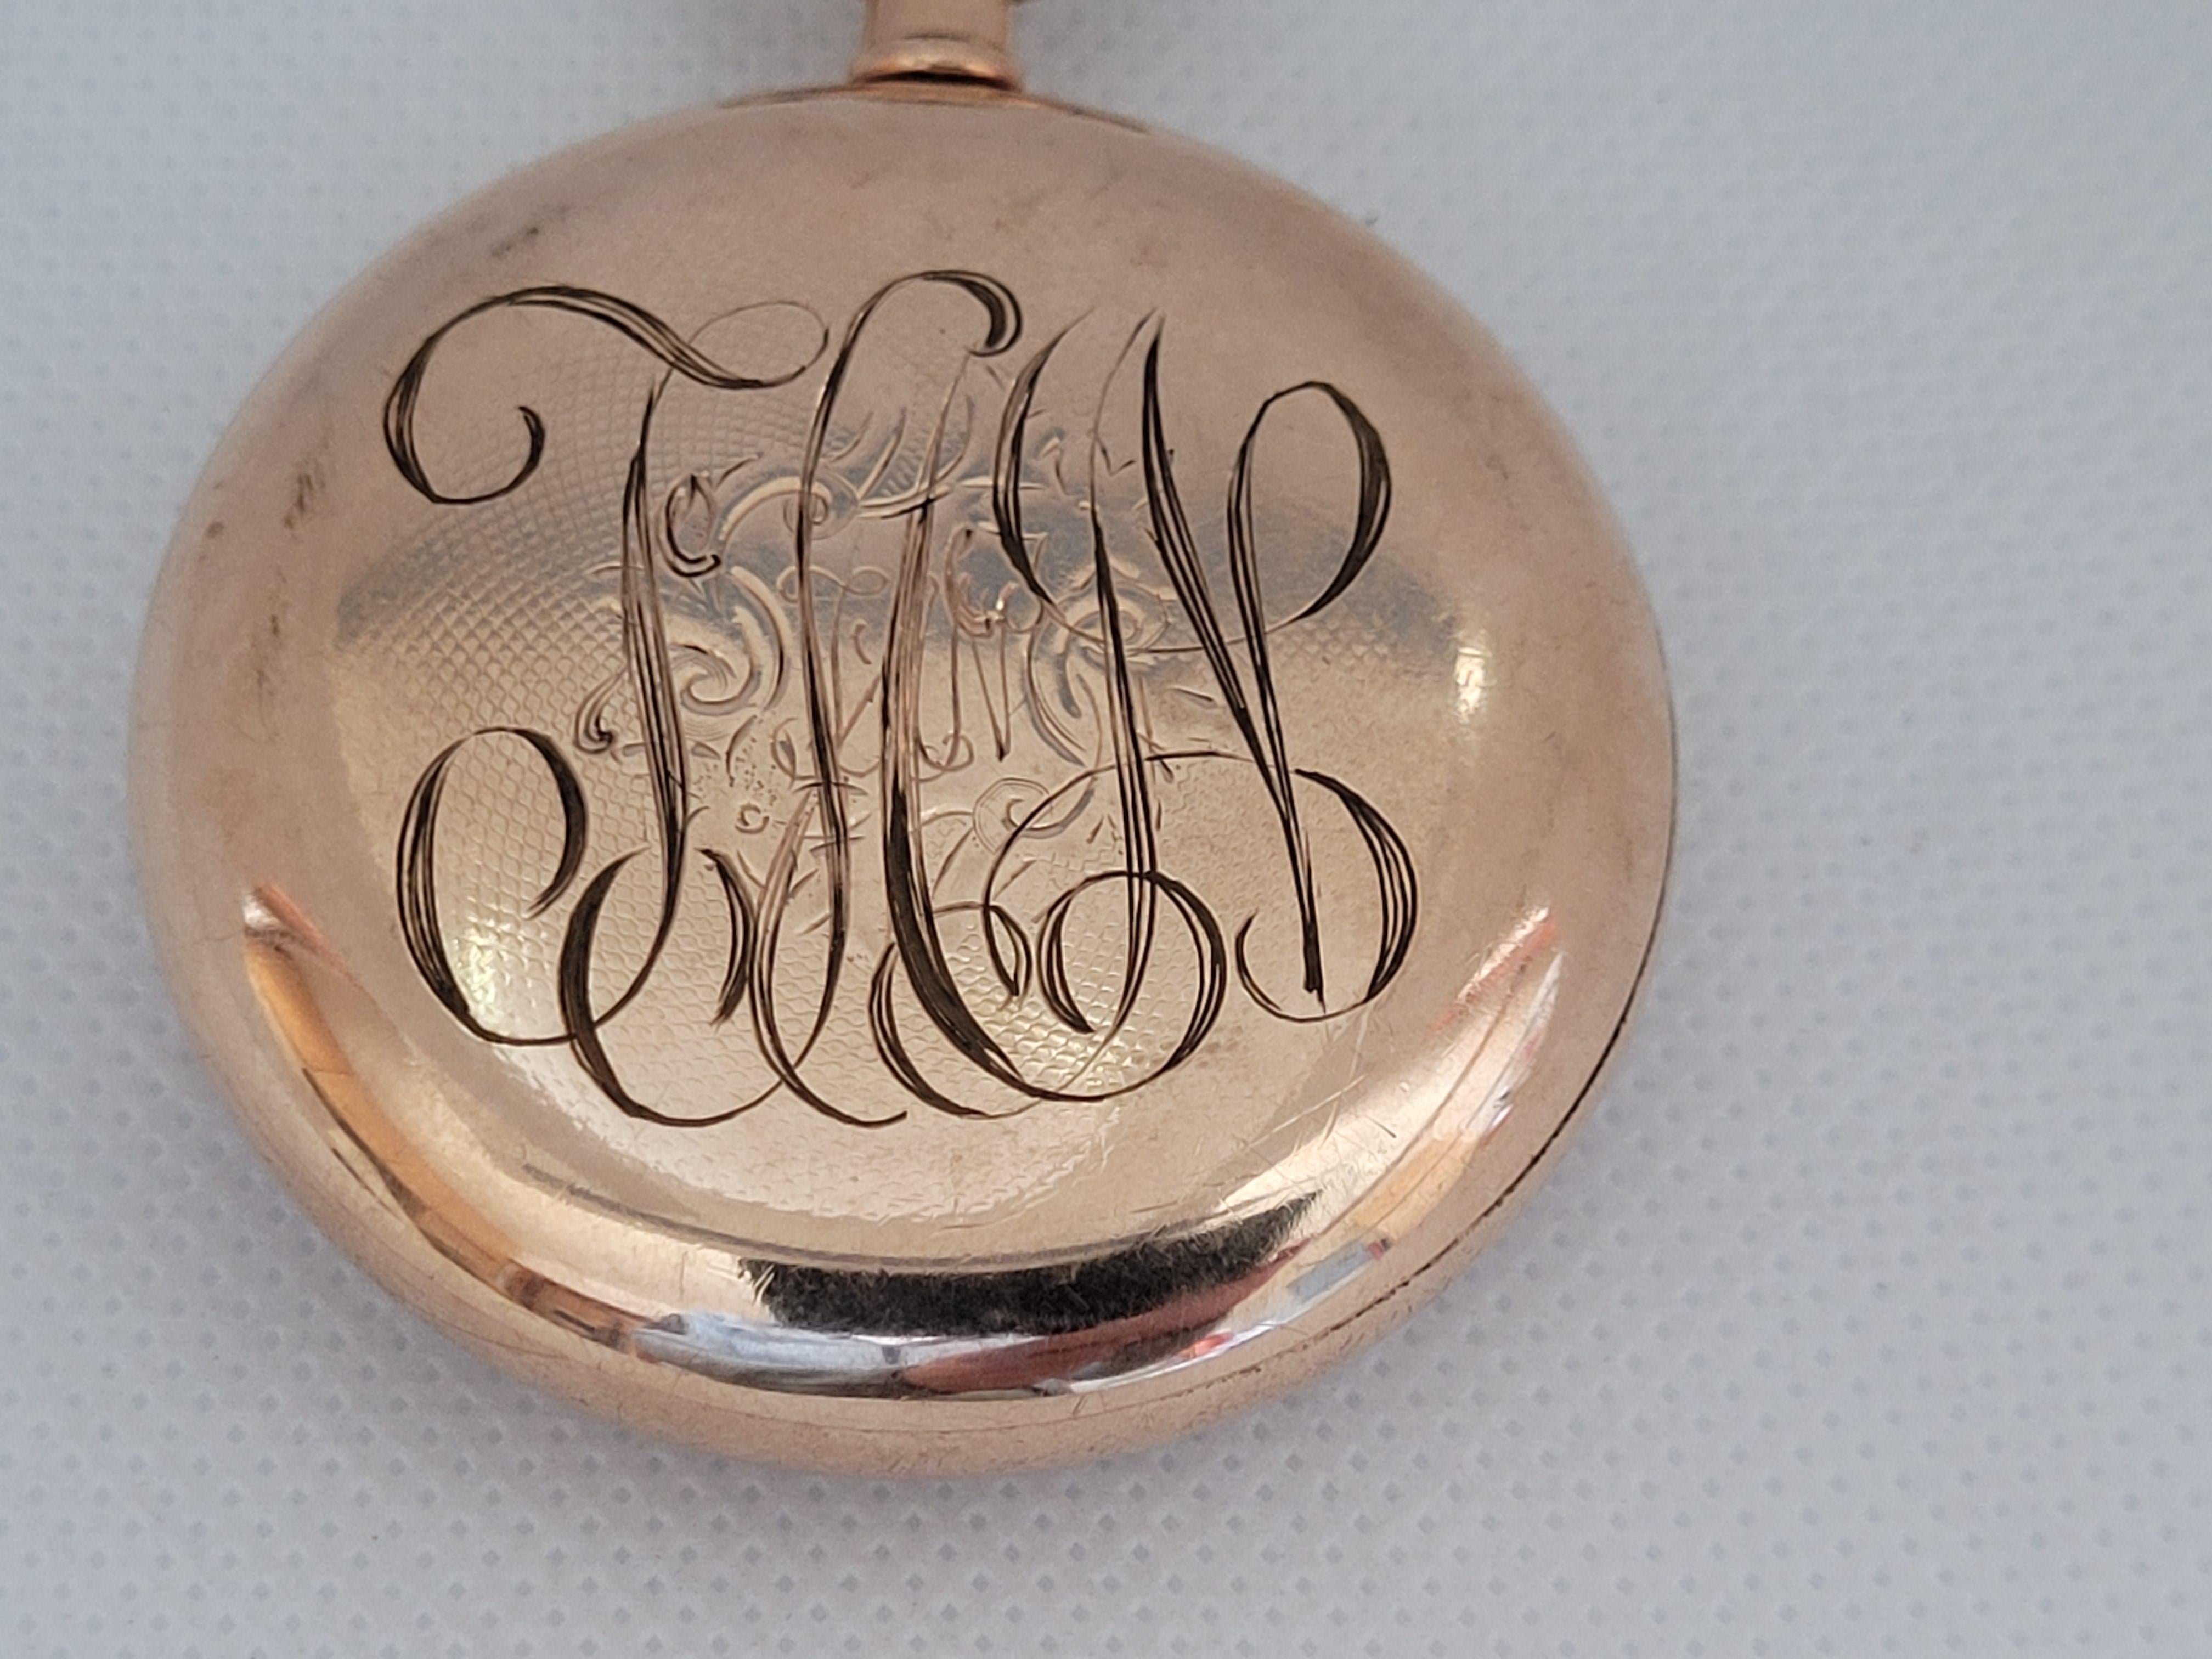 Elgin Pocket Watch Gold Plated Working 15 Jewels 11066484 Year 1905 In Good Condition For Sale In Rancho Santa Fe, CA